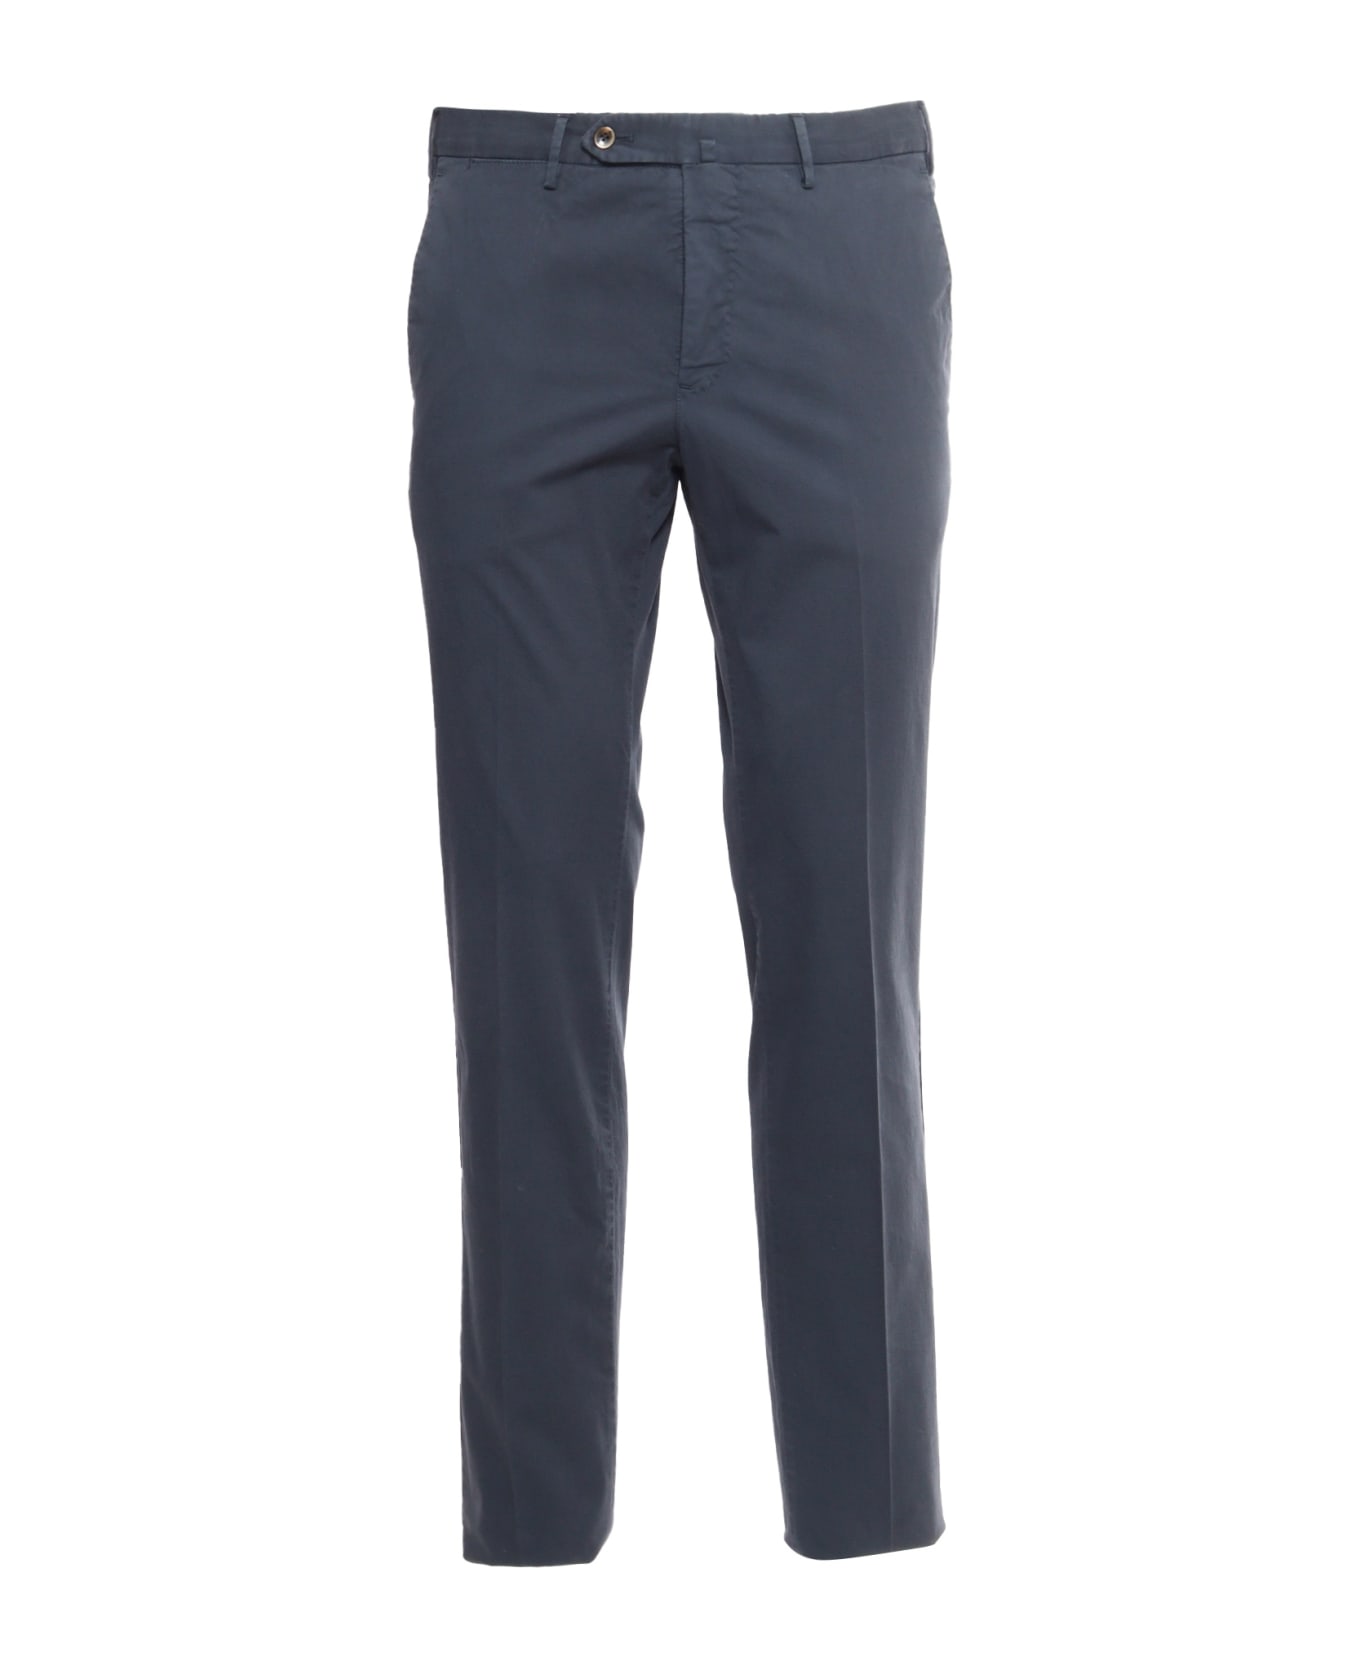 PT Torino Superslim Blue Trousers - BLUE ボトムス